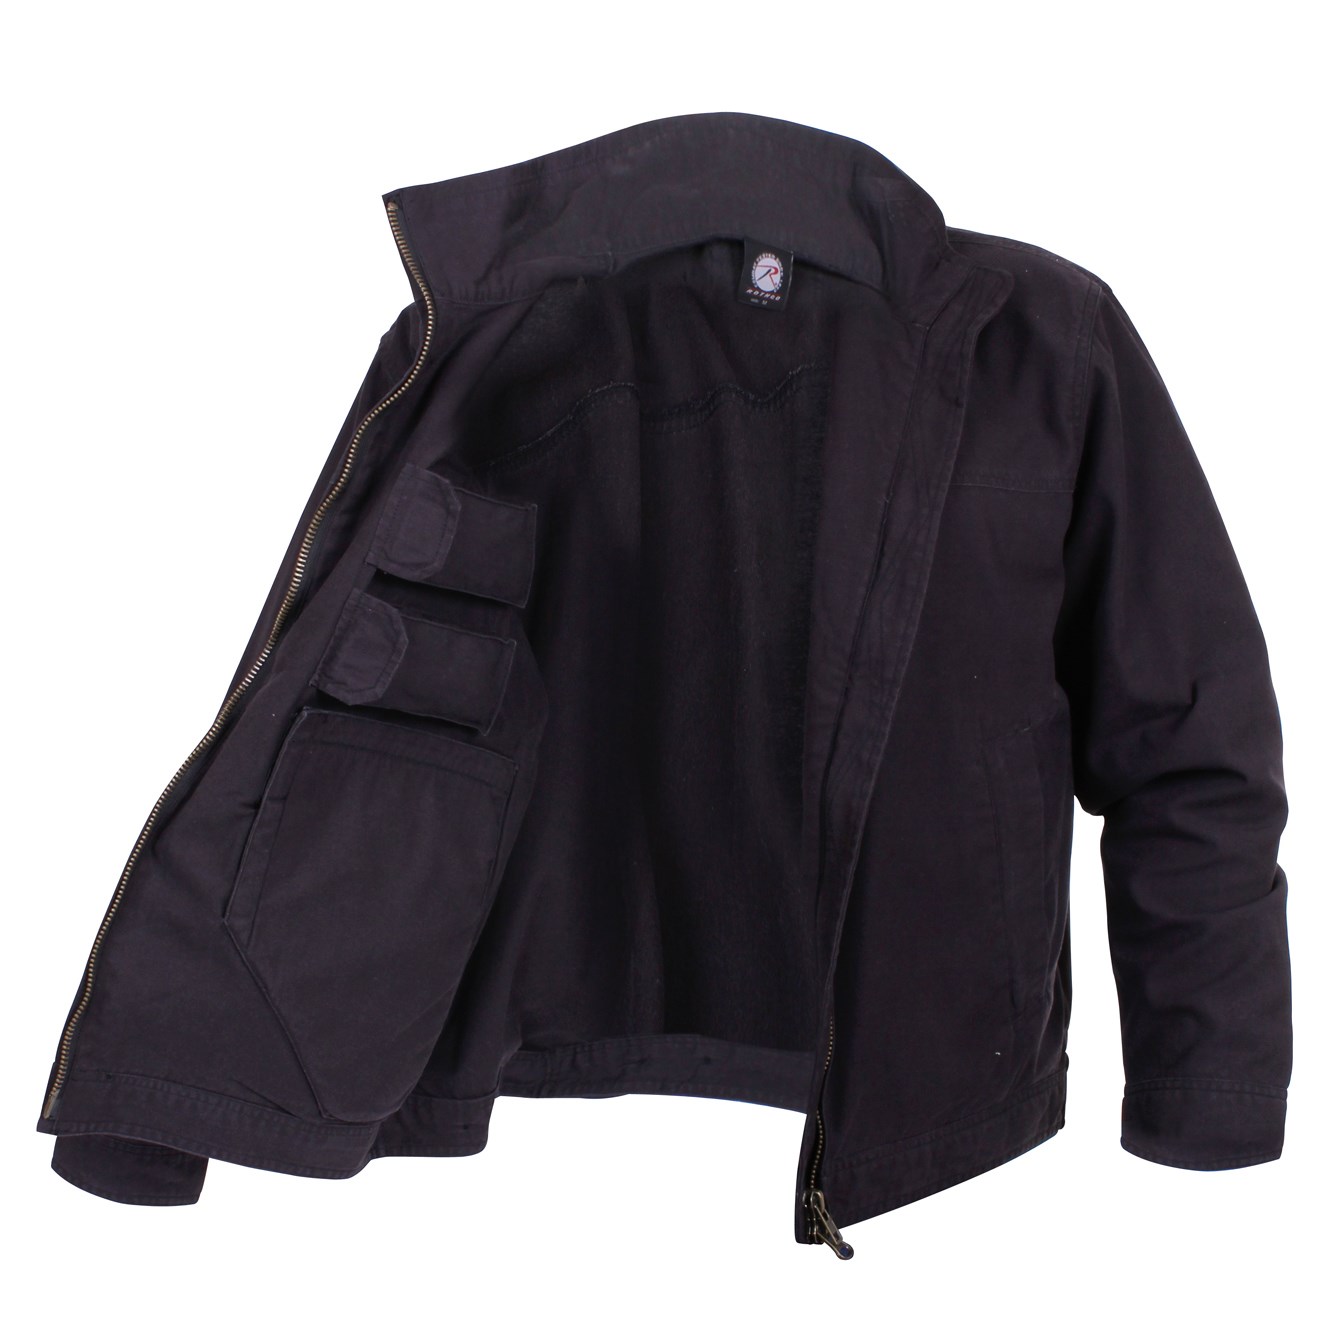 Jacke CONCEALED CARRY light SCHWARZ ROTHCO 59585 L-11